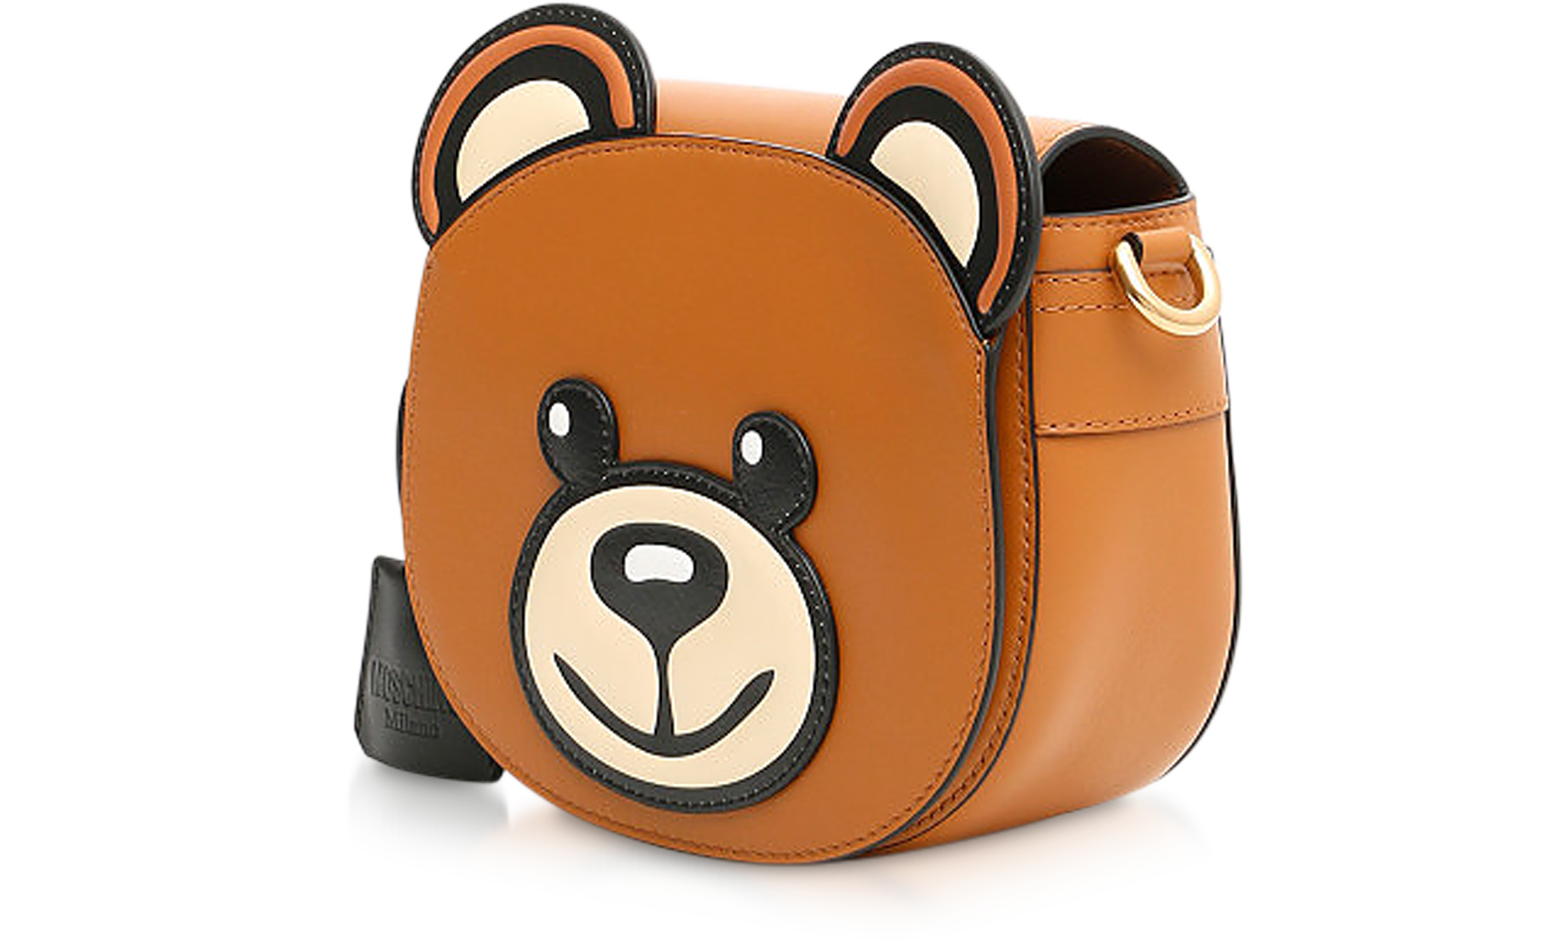 Moschino Teddy Bear Face Leather Shoulder Bag